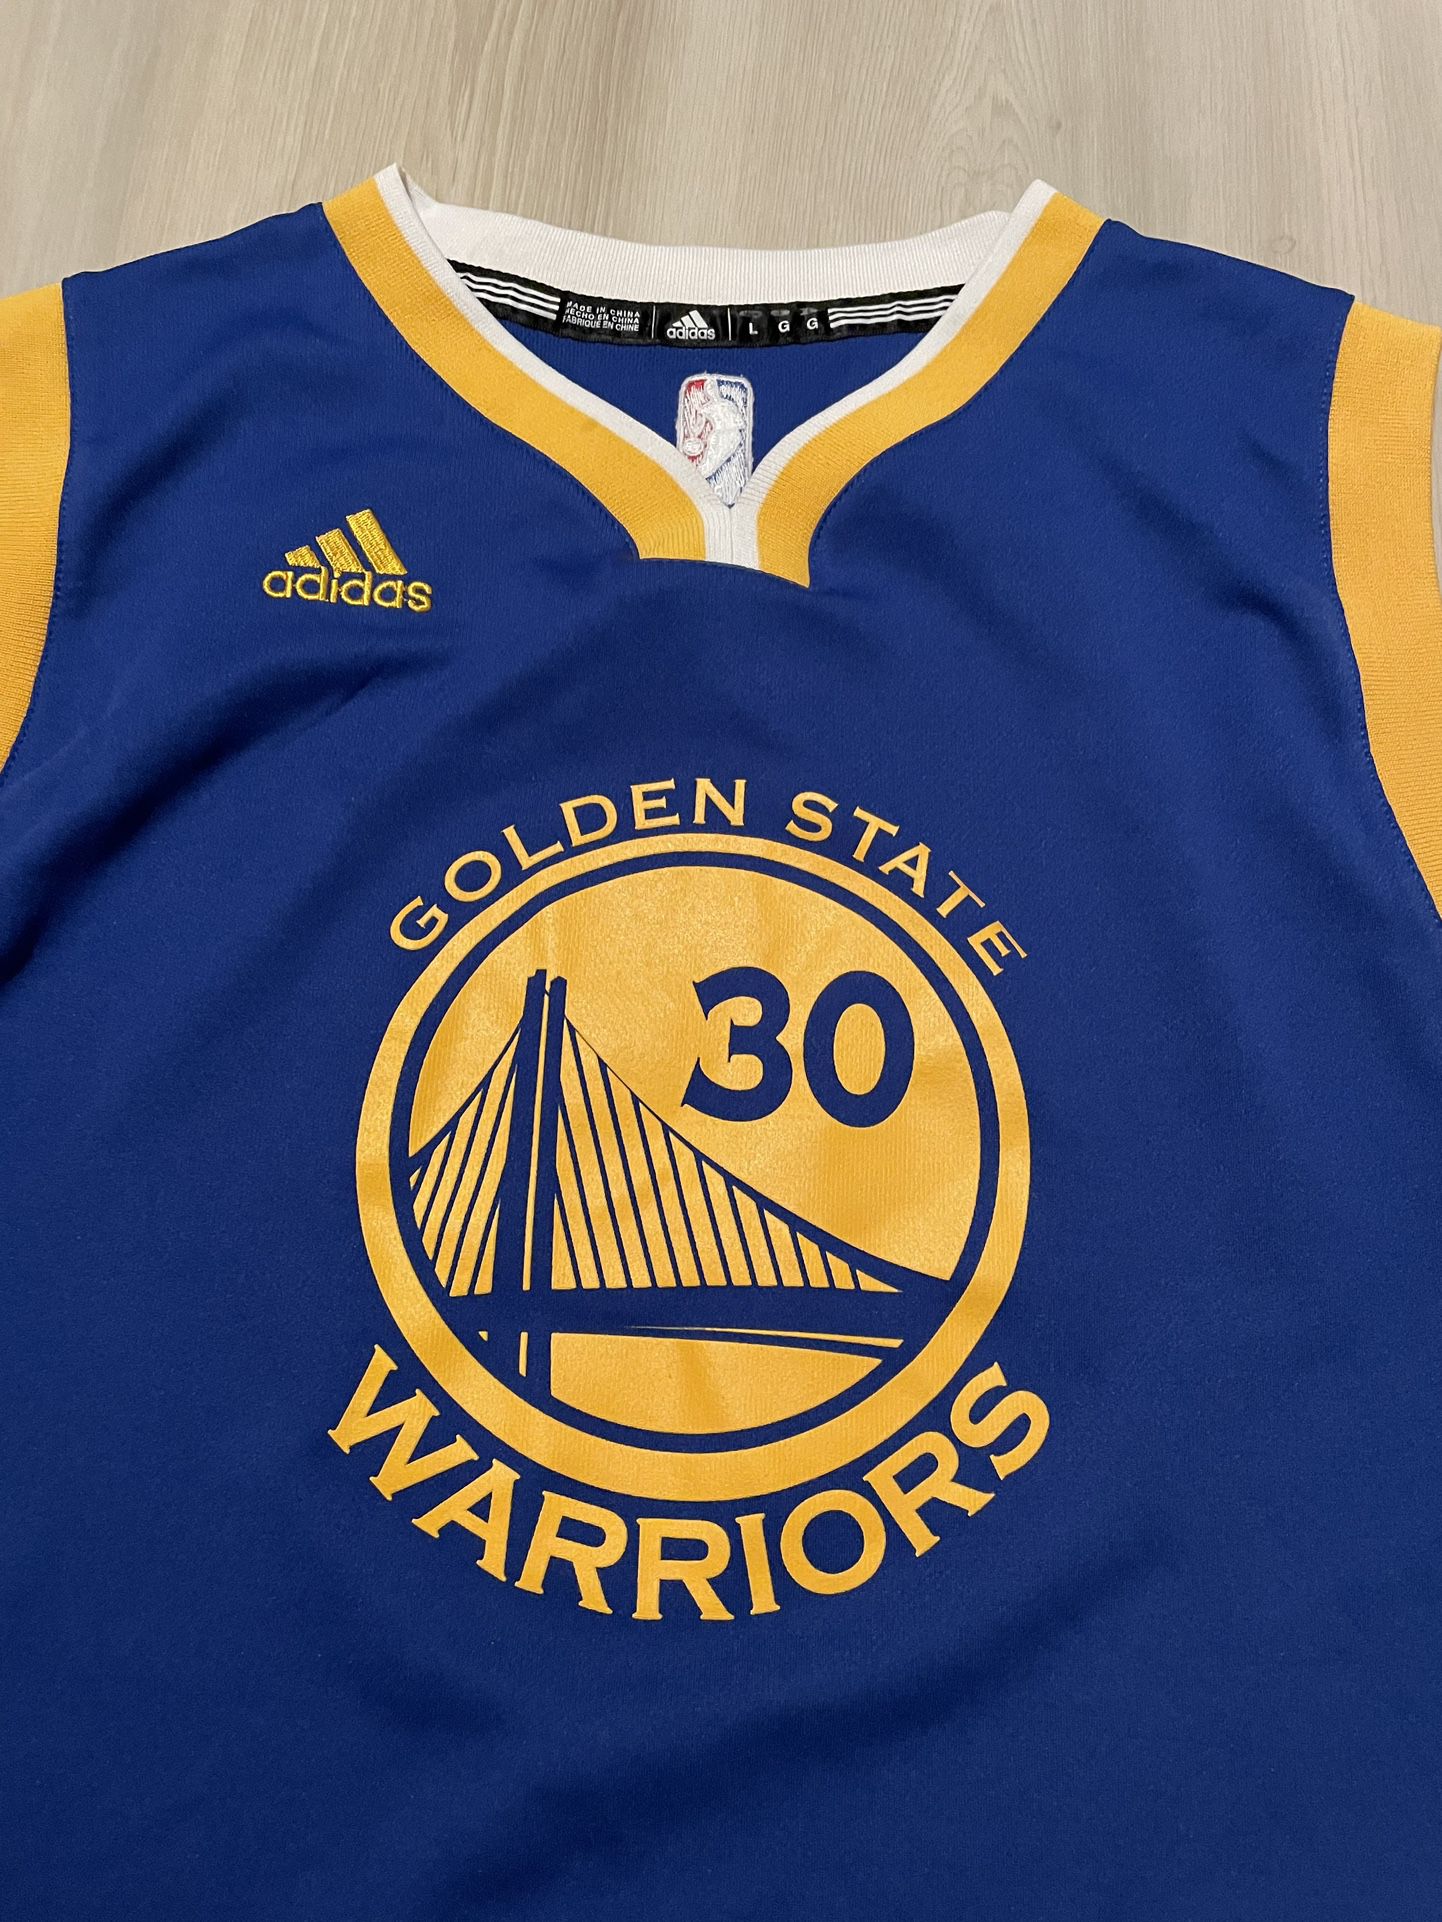 2016 NBA All Star Stephen Curry Jersey Youth Medium for Sale in Hayward, CA  - OfferUp